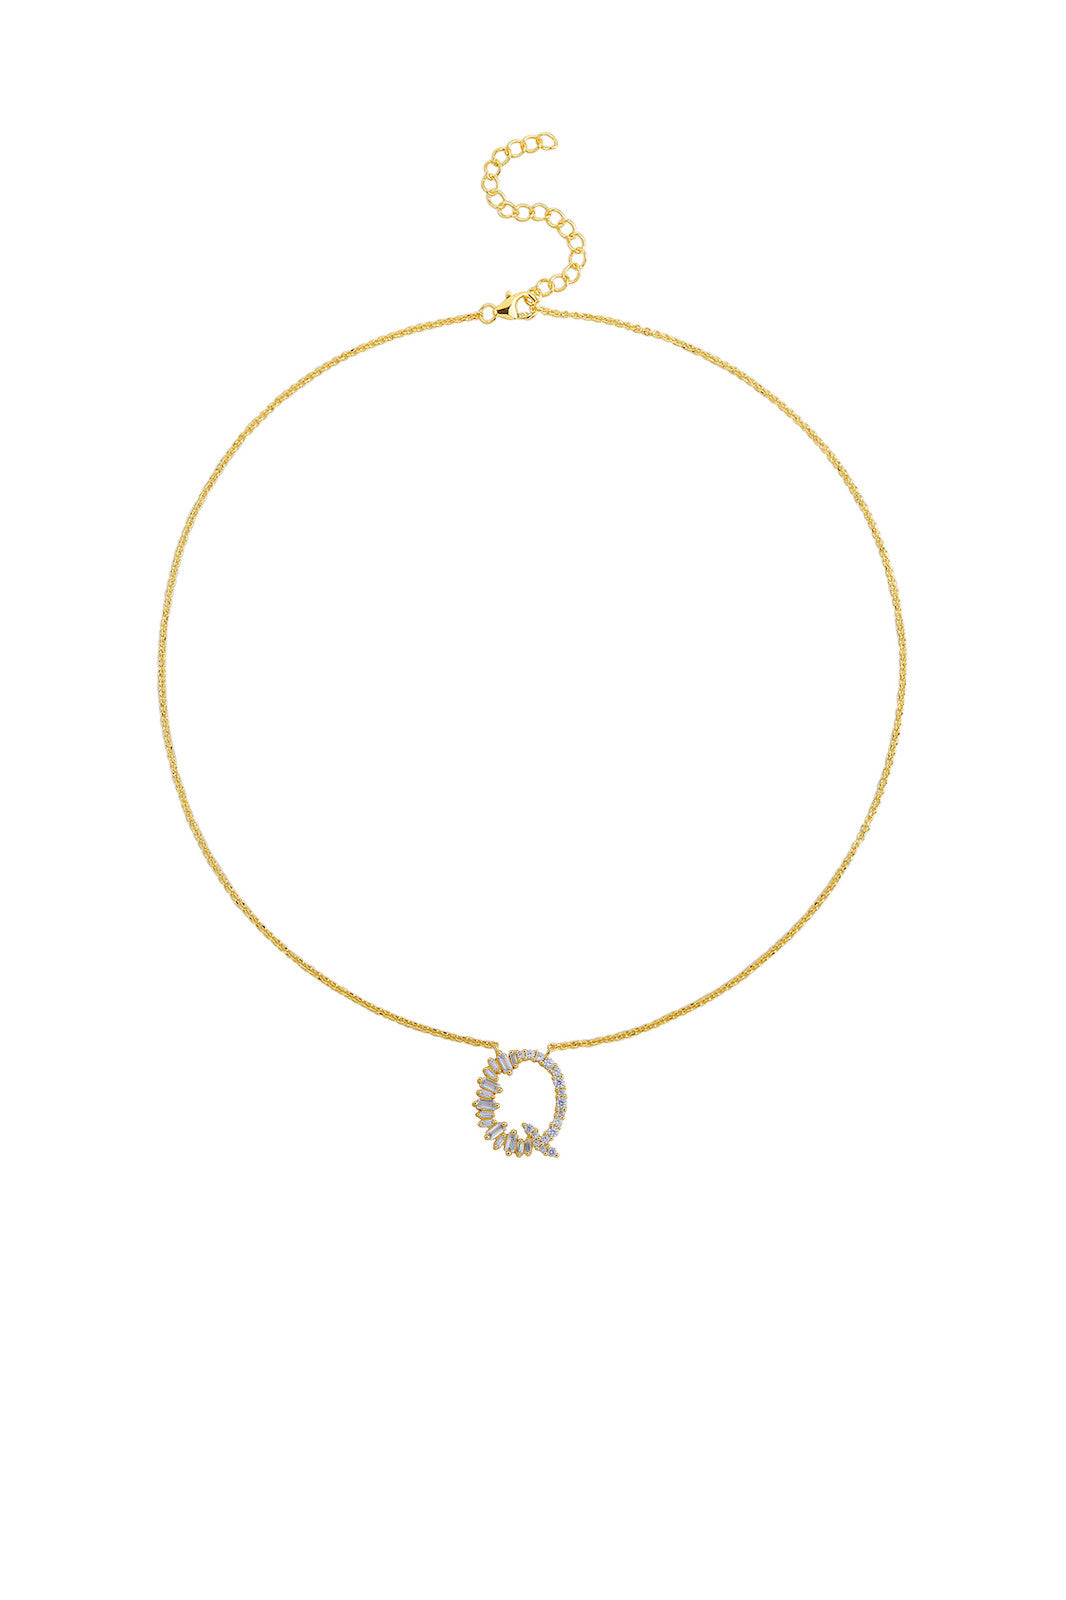 Gold Plated Sterling Silver Initial Necklace - Letter Q Detail